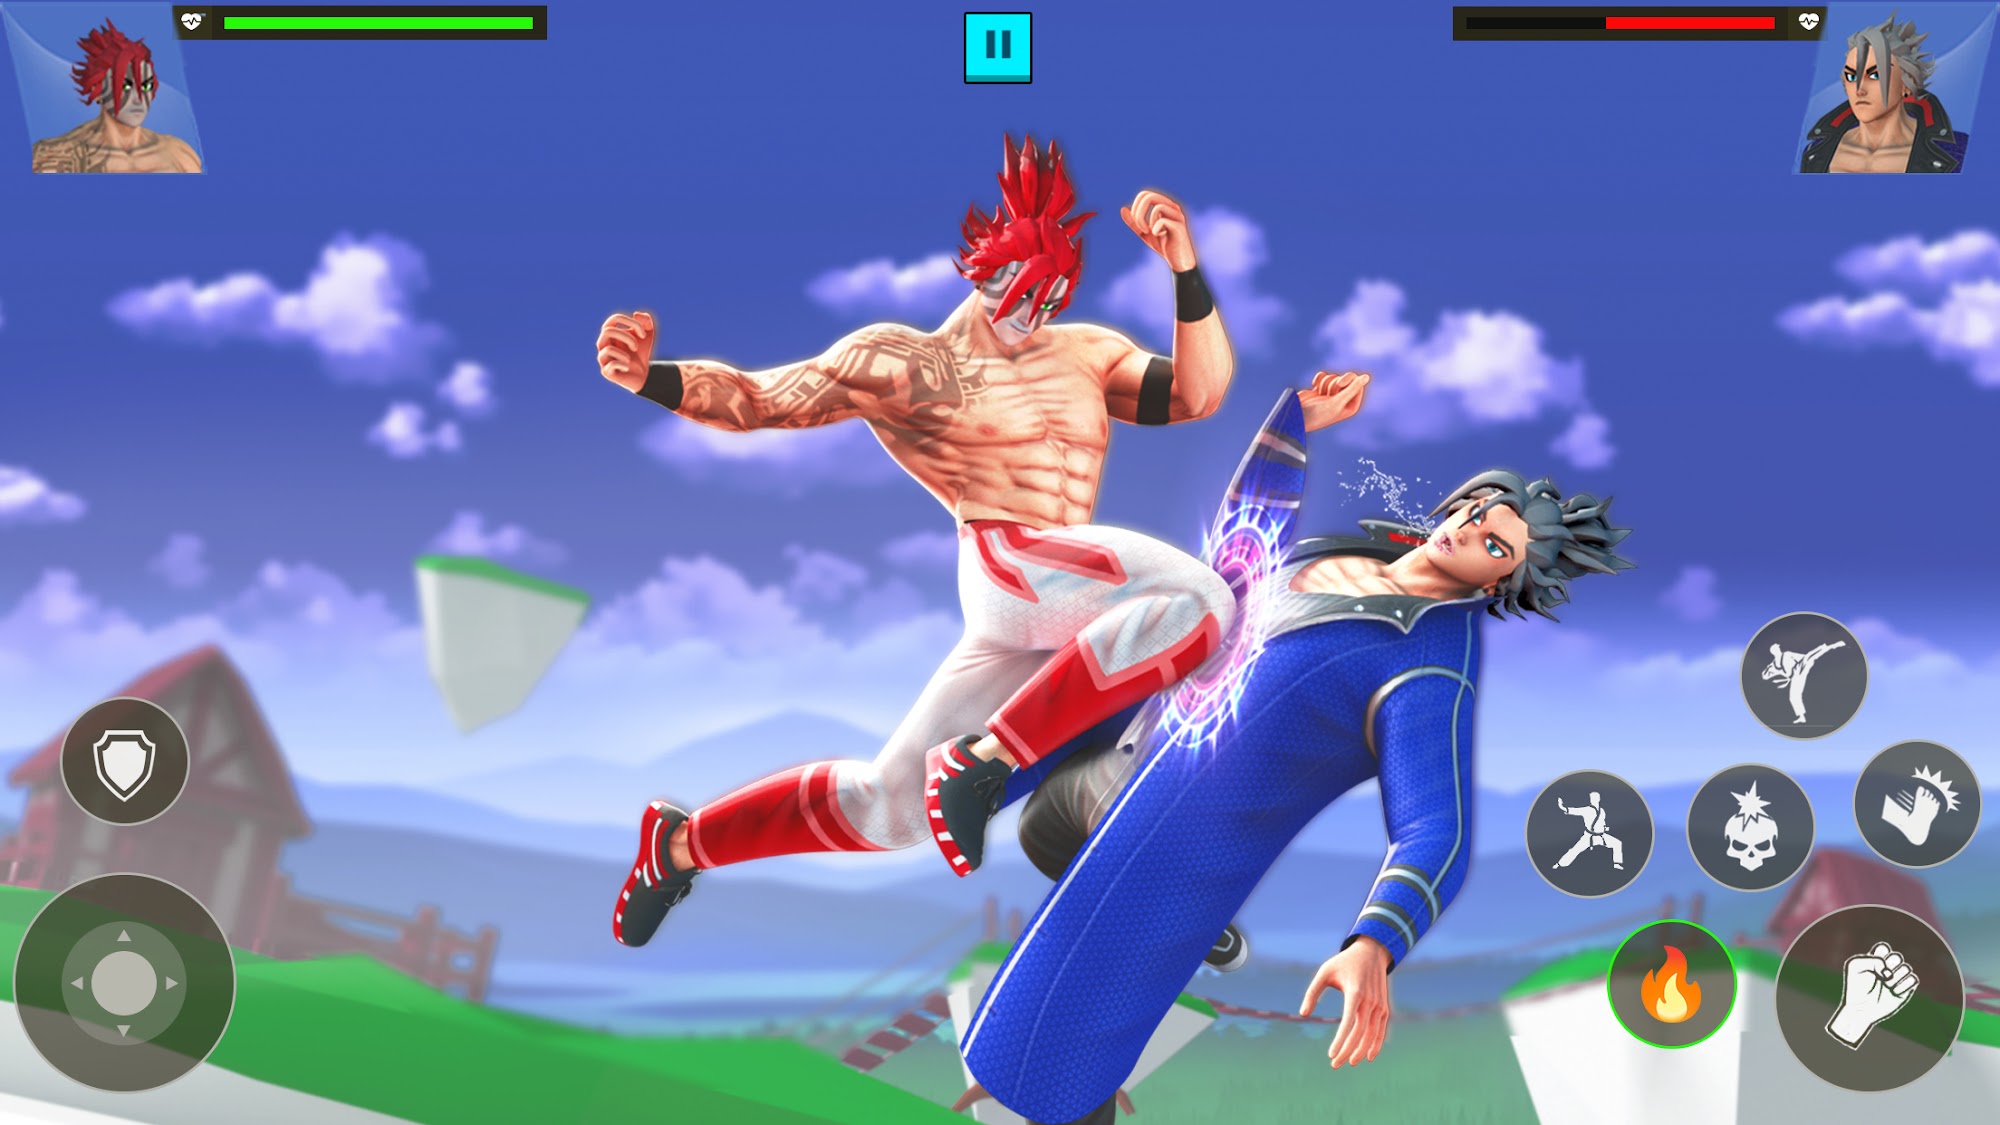 Scarica Anime Fighting Game gratis per Android.